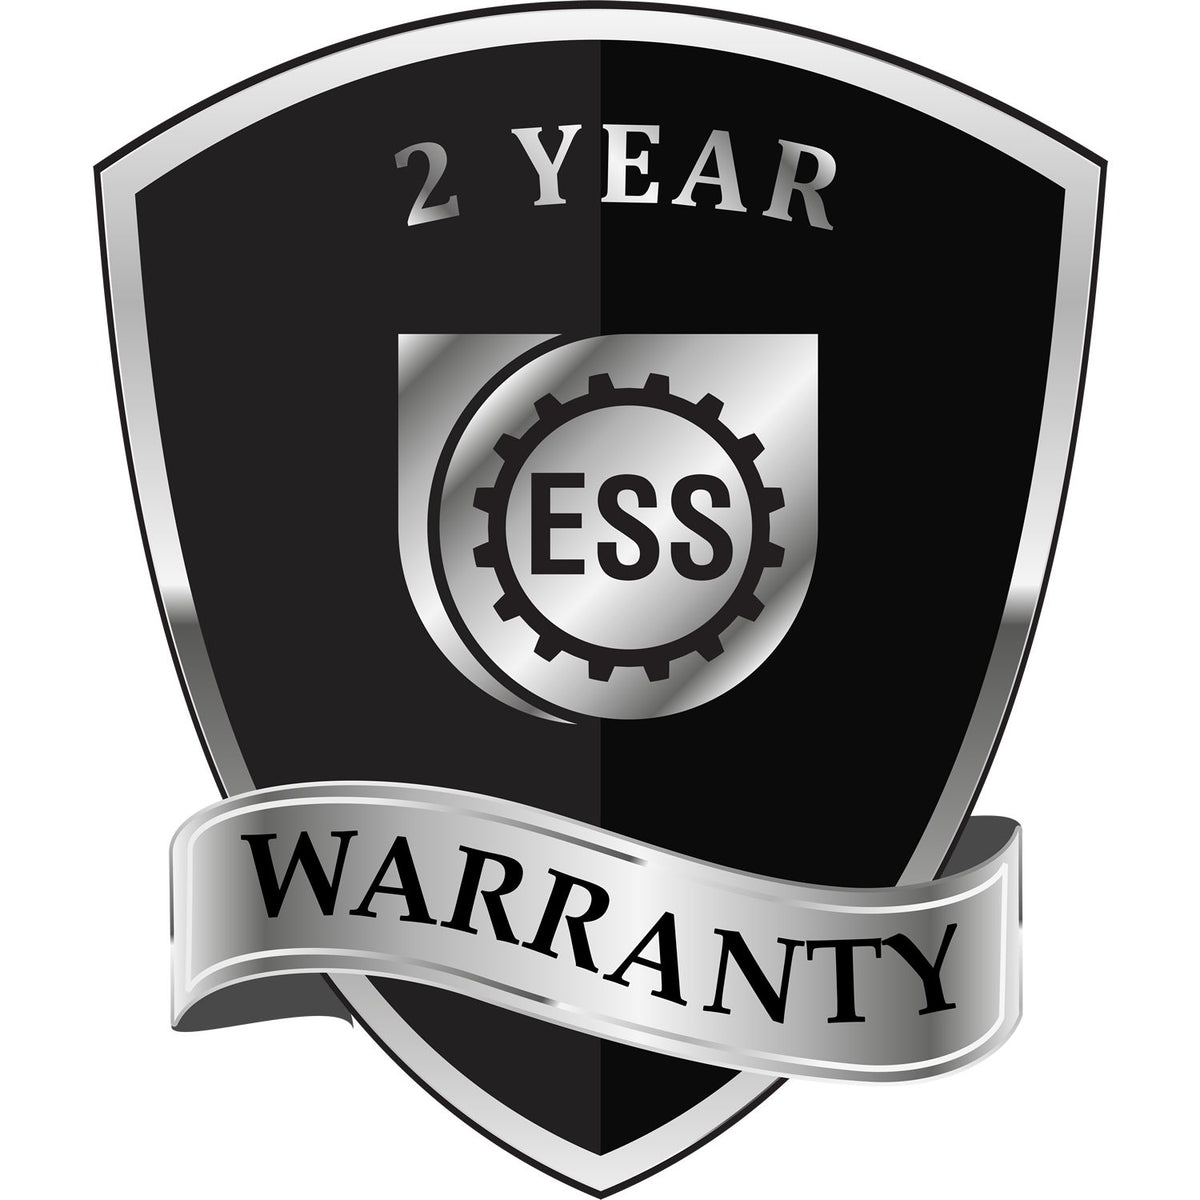 A badge or emblem showing a warranty icon for the New Jersey Desk Architect Embossing Seal